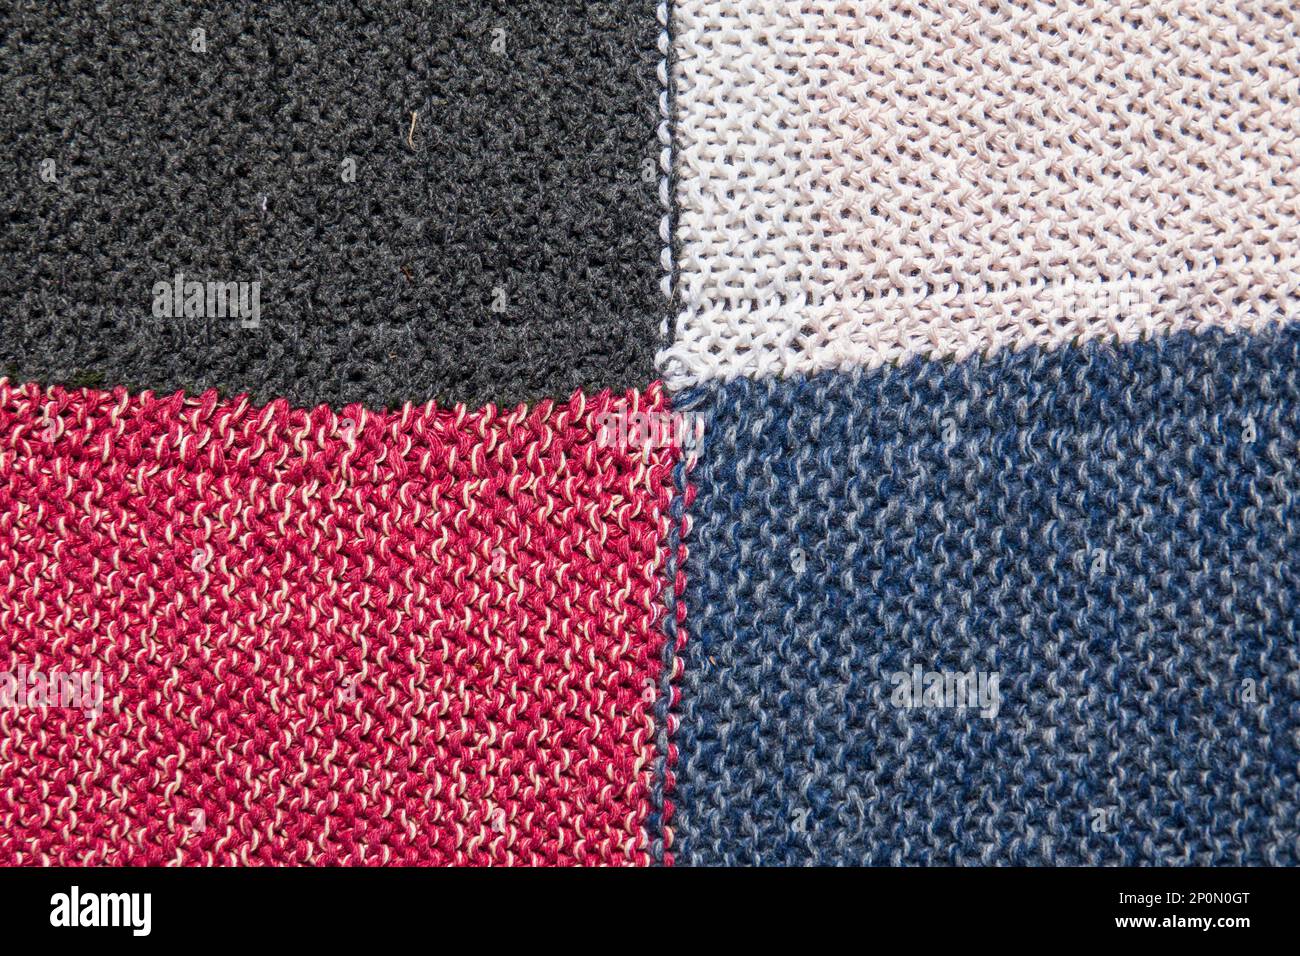 Traditional knitting background. Woolen knitted cloth of white, black, blue and red color Stock Photo